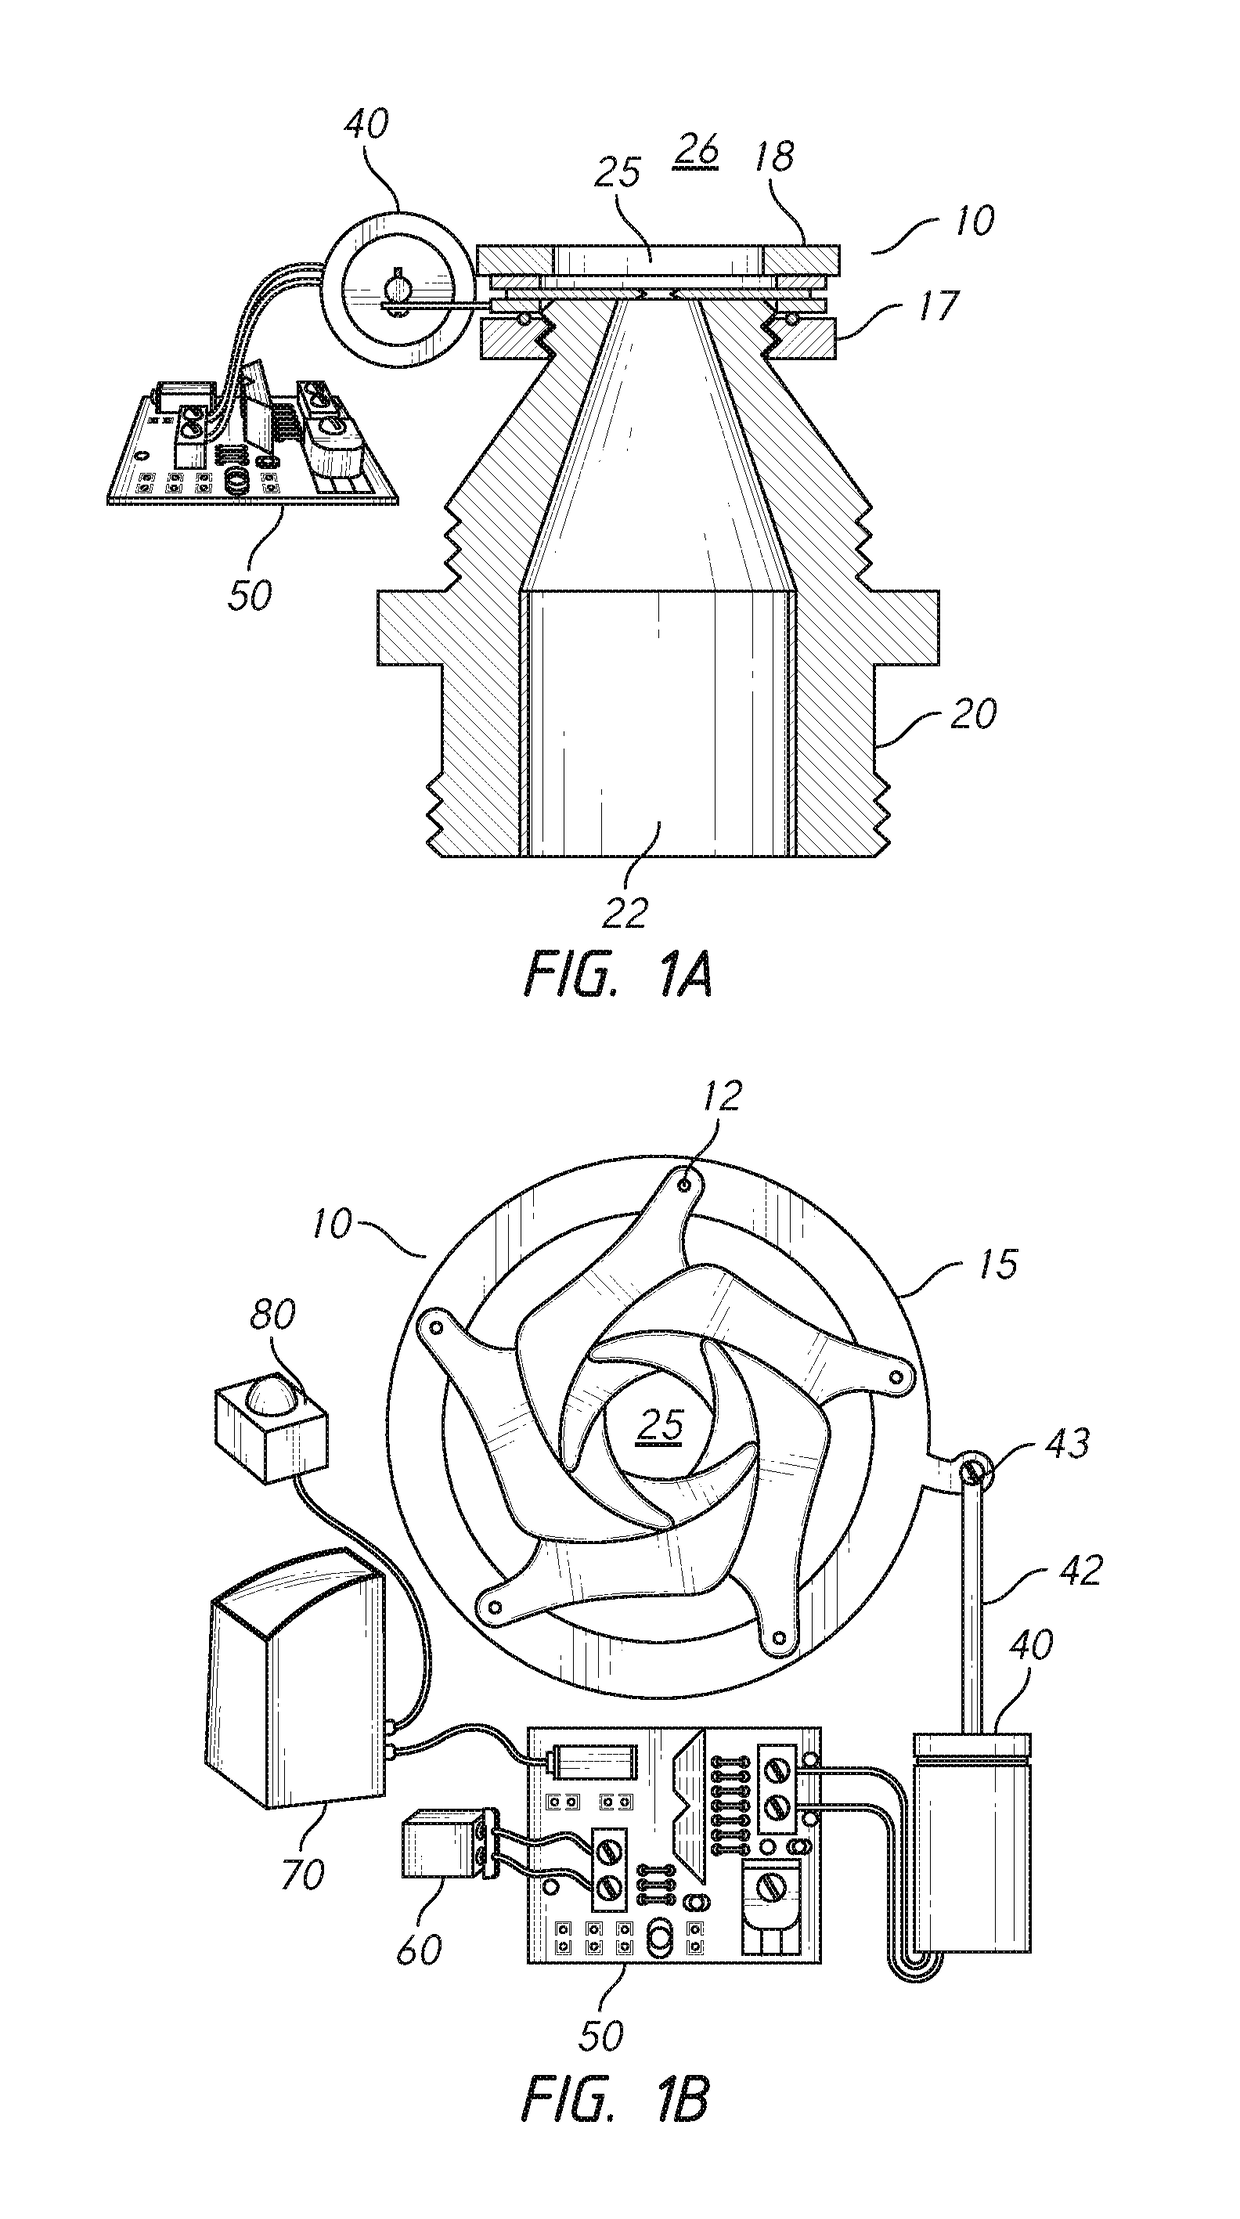 Nozzle with automatic adjustable aperture